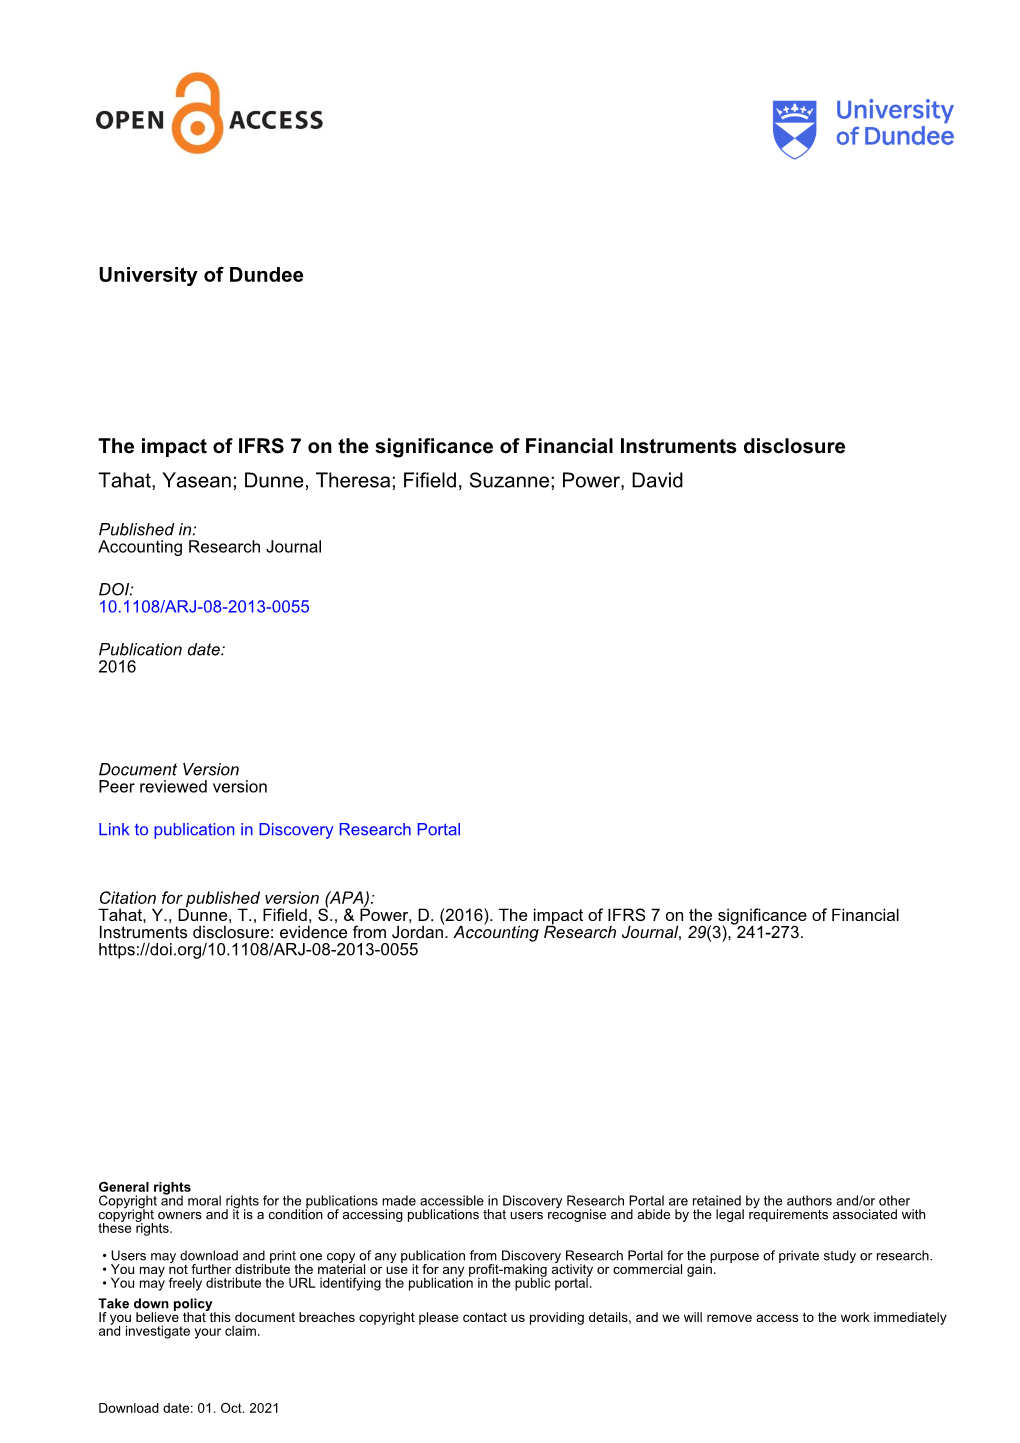 University of Dundee the Impact of IFRS 7 on the Significance Of